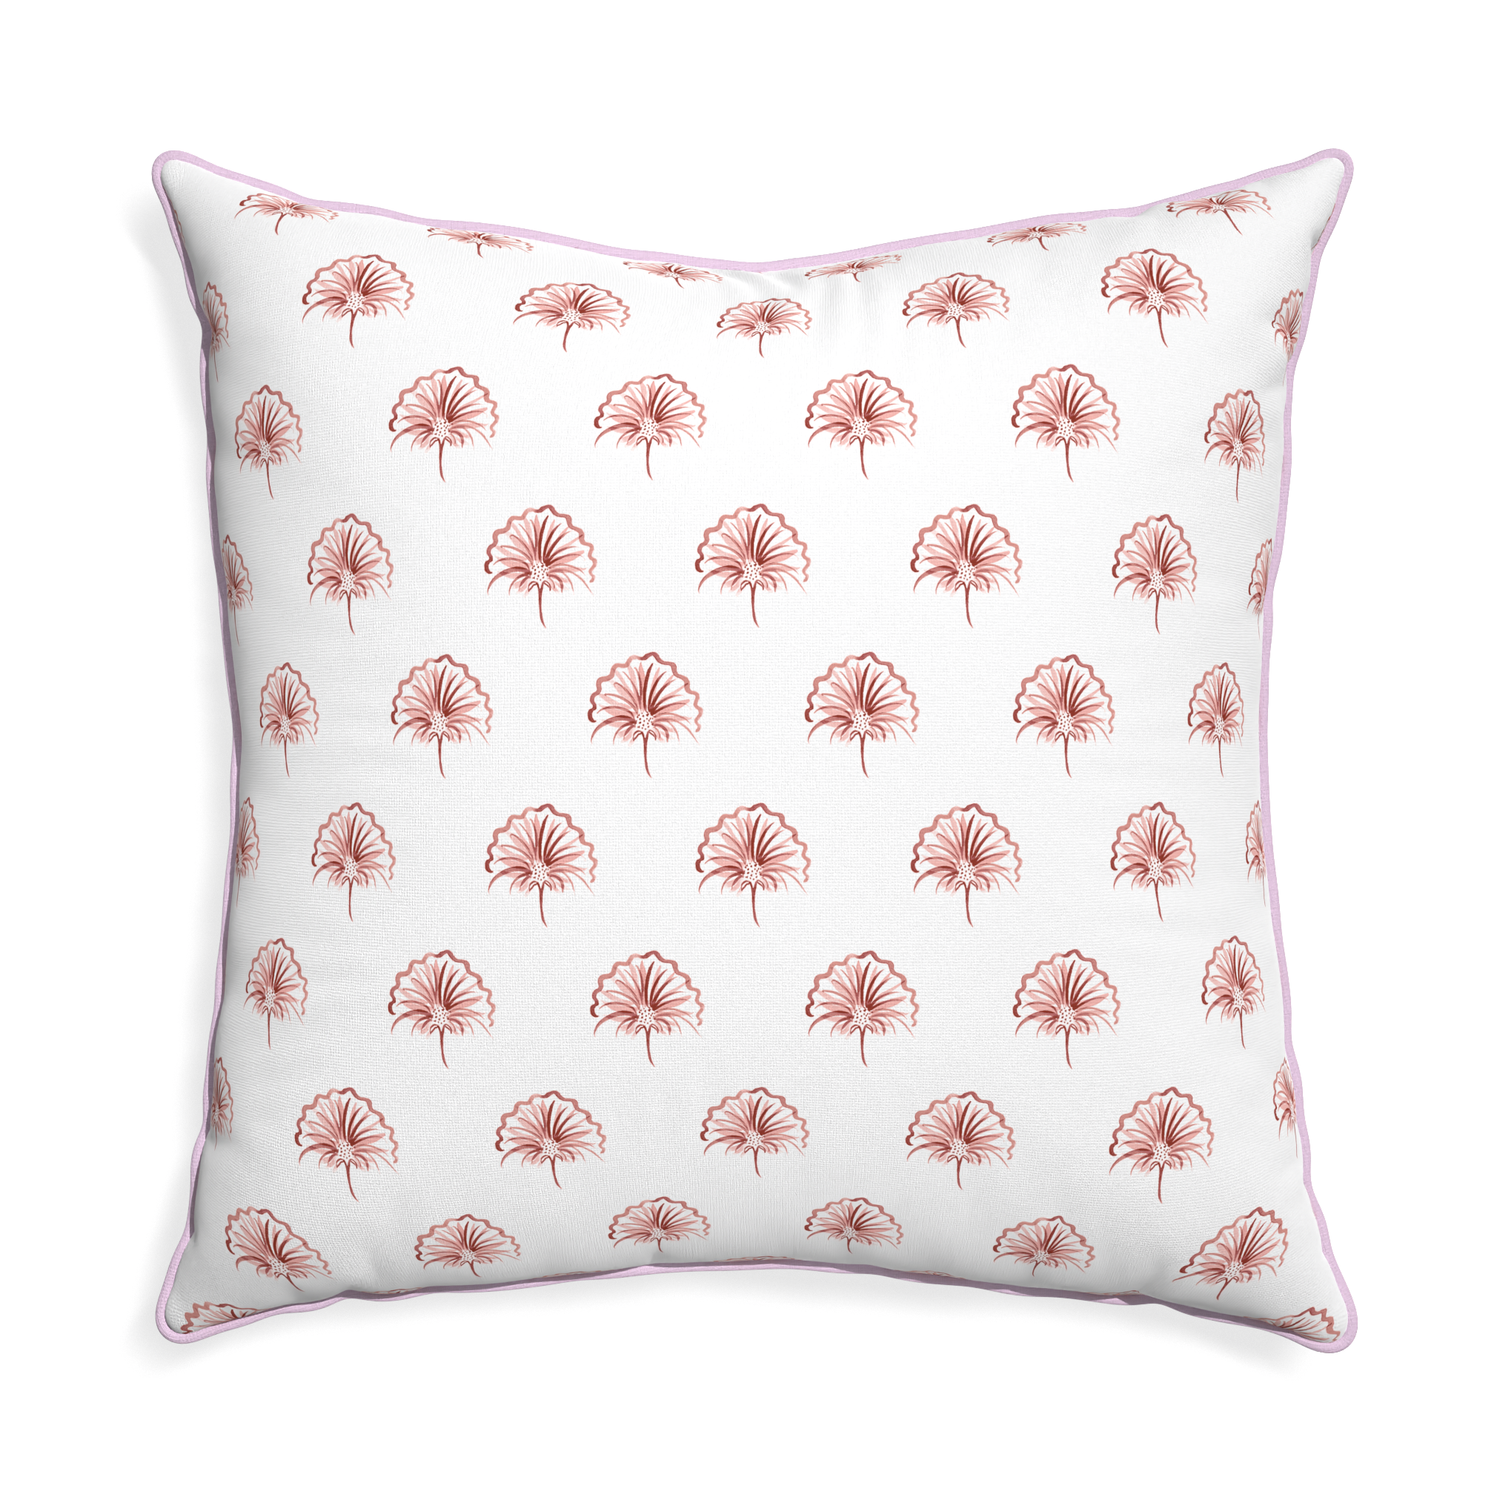 Euro-sham penelope rose custom floral pinkpillow with l piping on white background